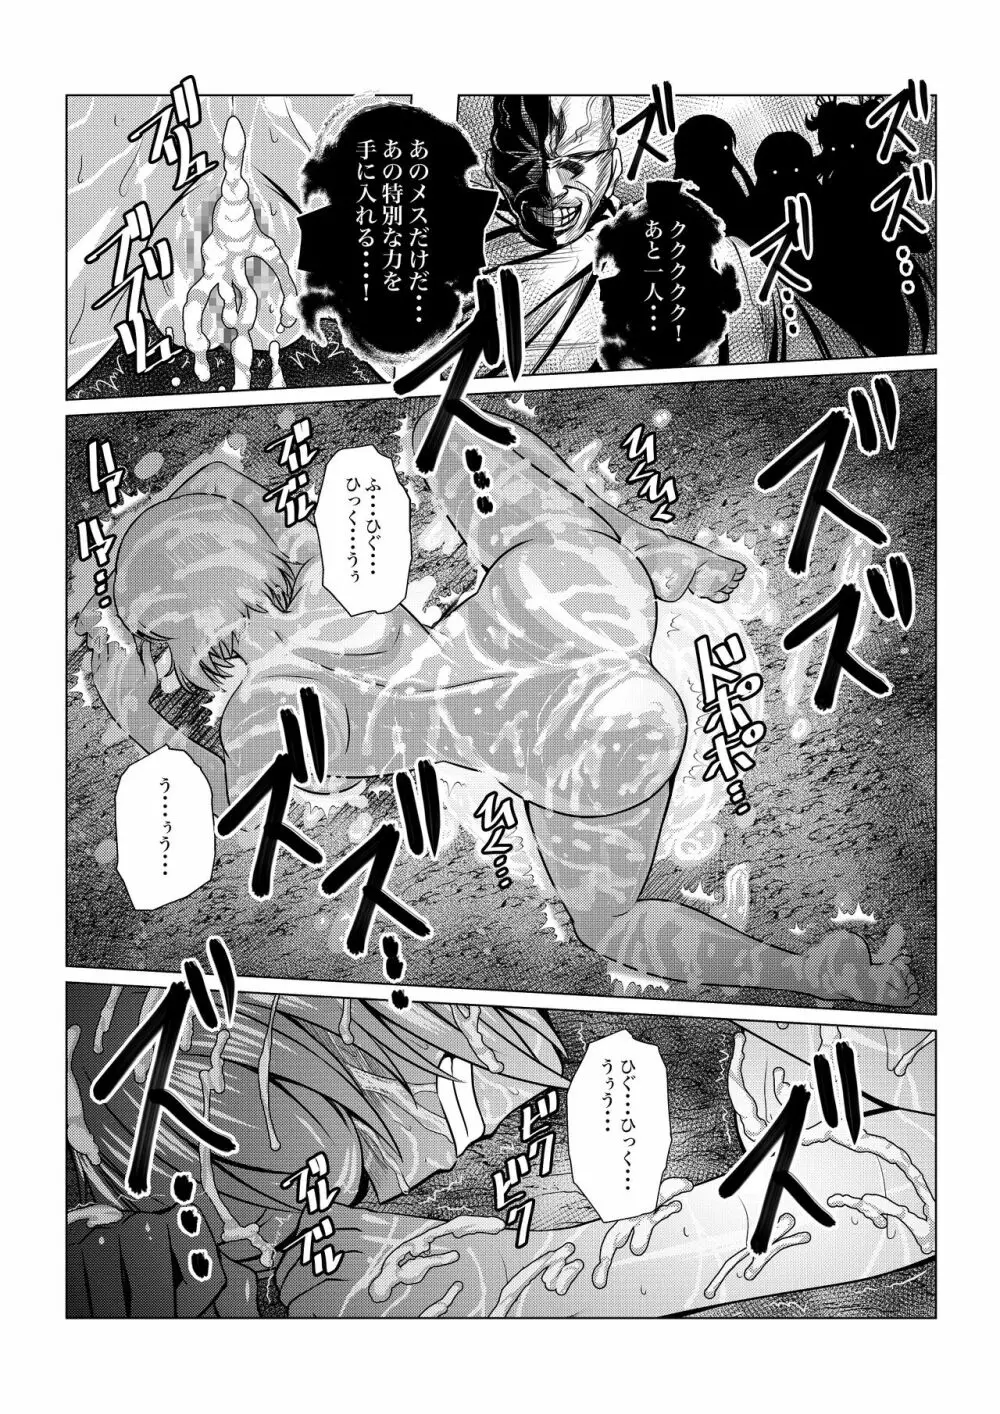 Tales Of DarkSide〜三散華〜 - page24